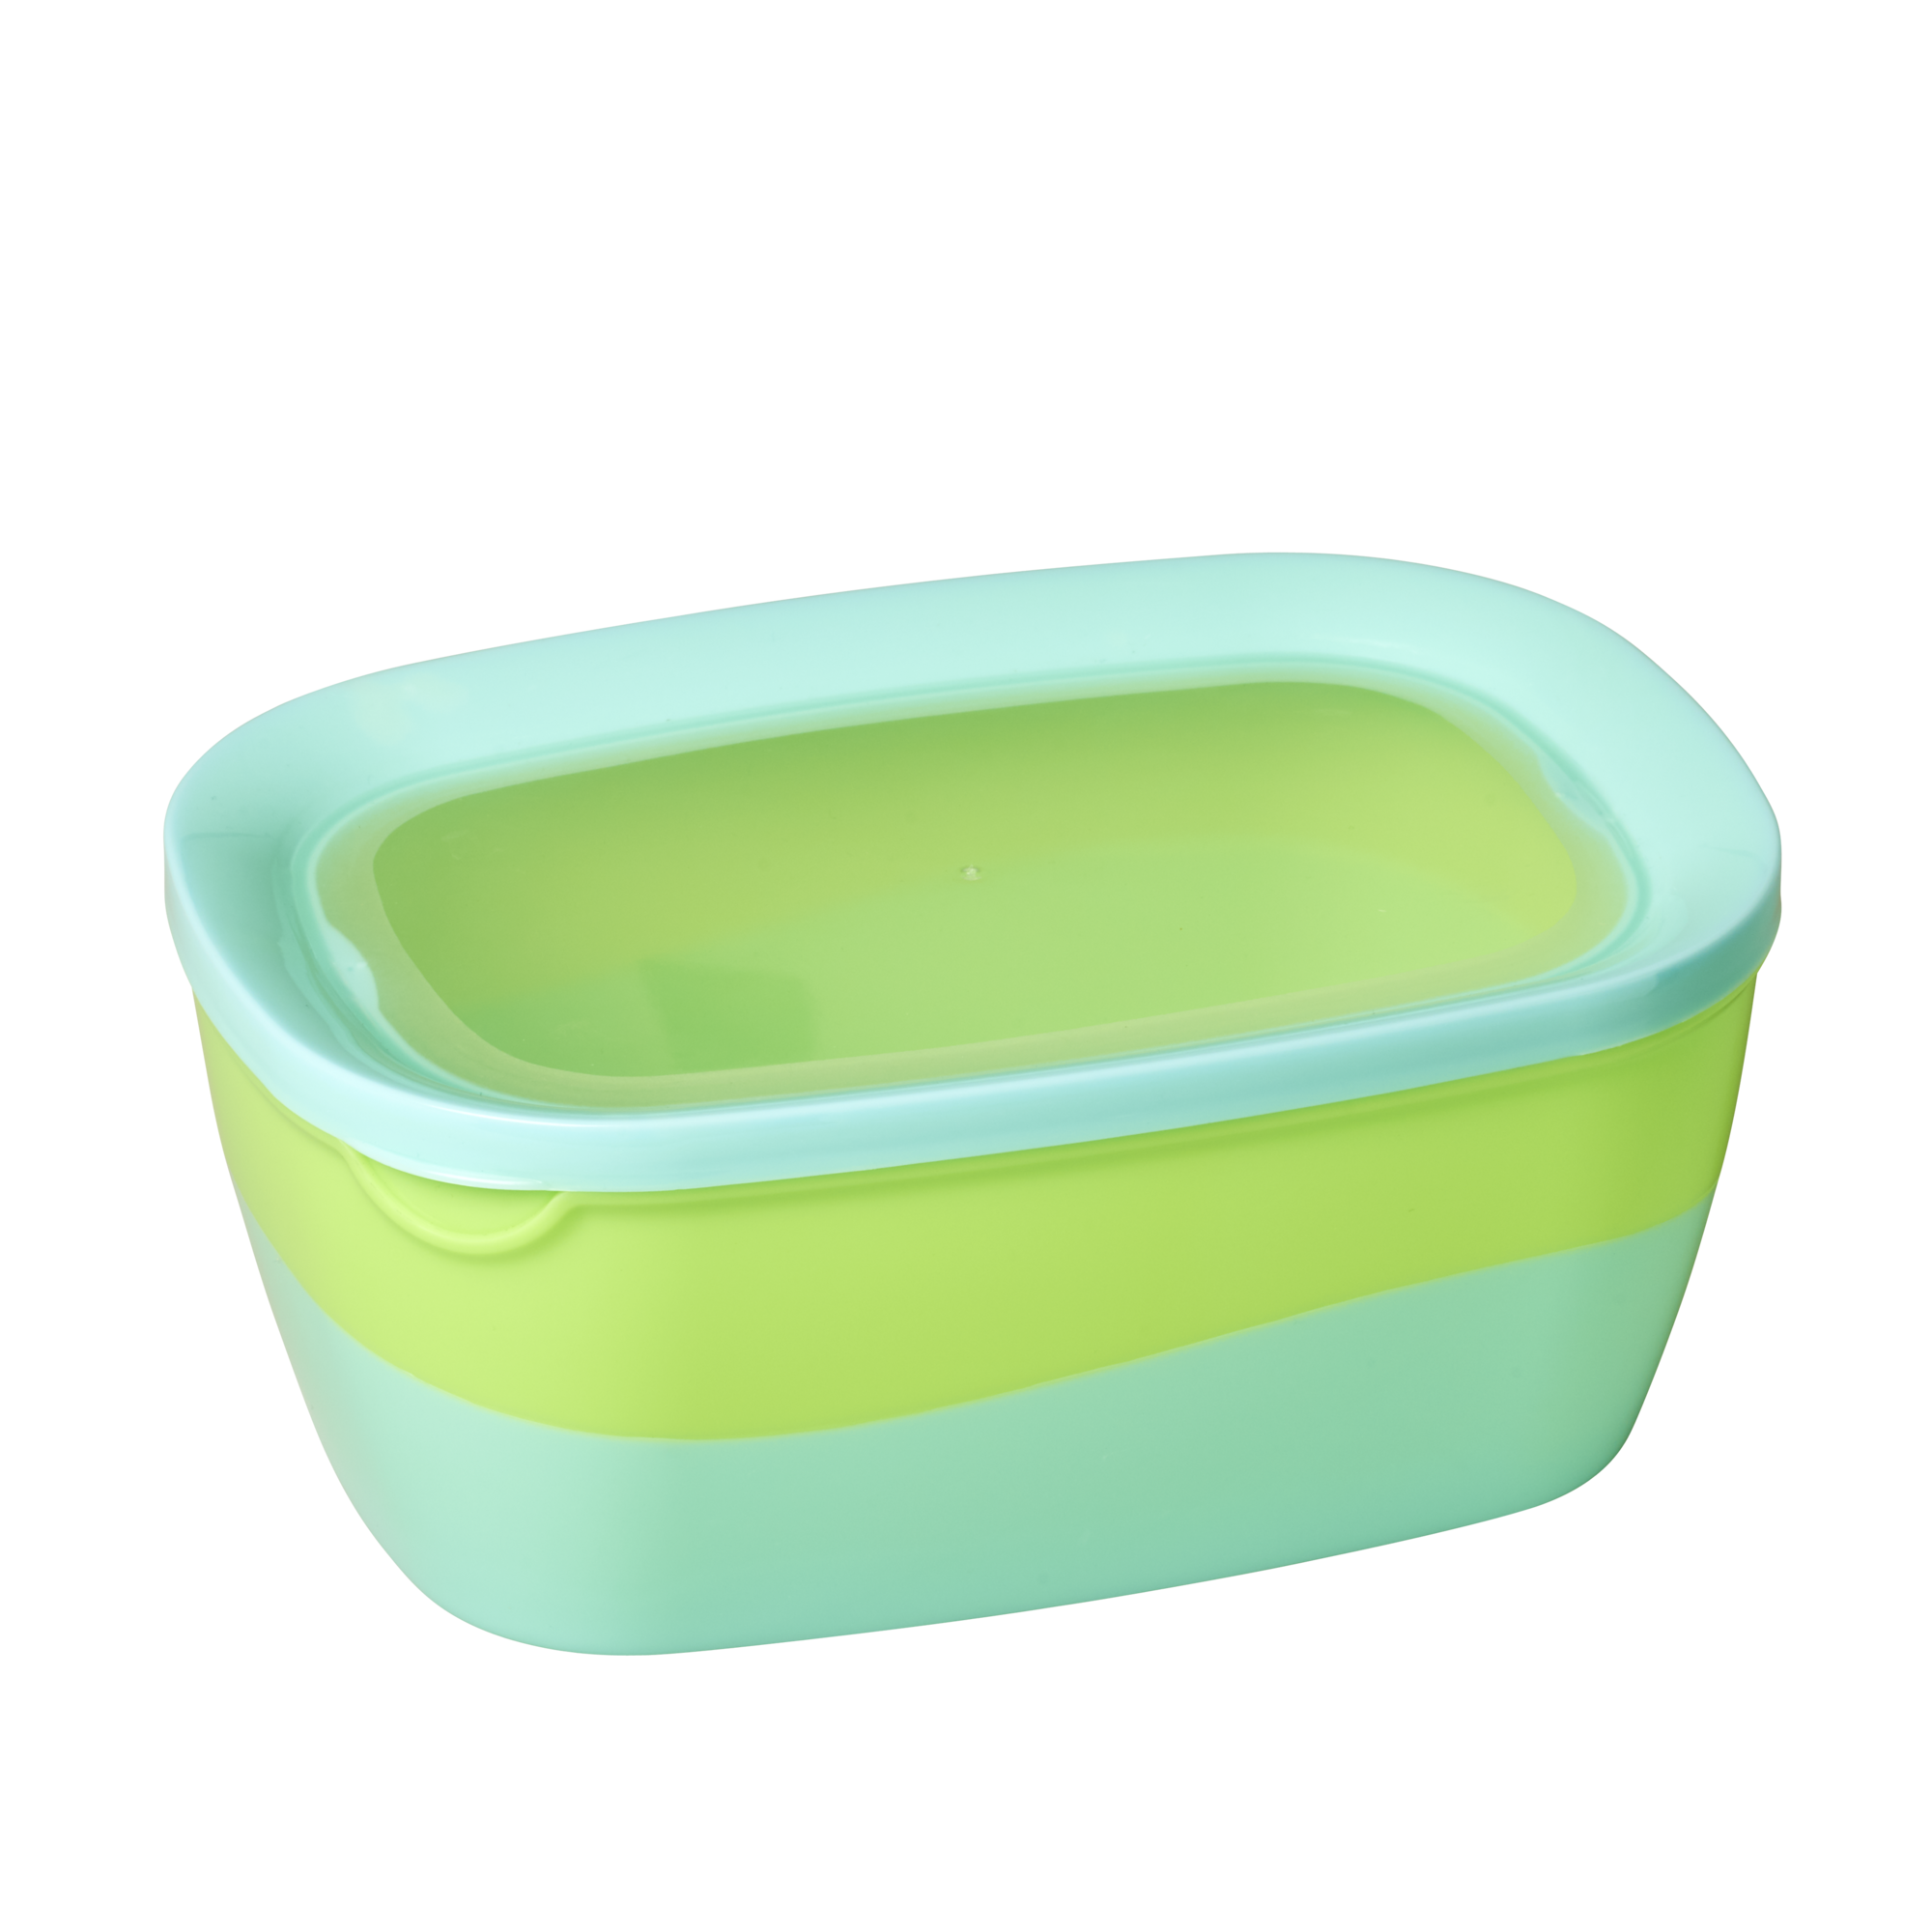 Food boxes set of 3 in blue green colors from Rice